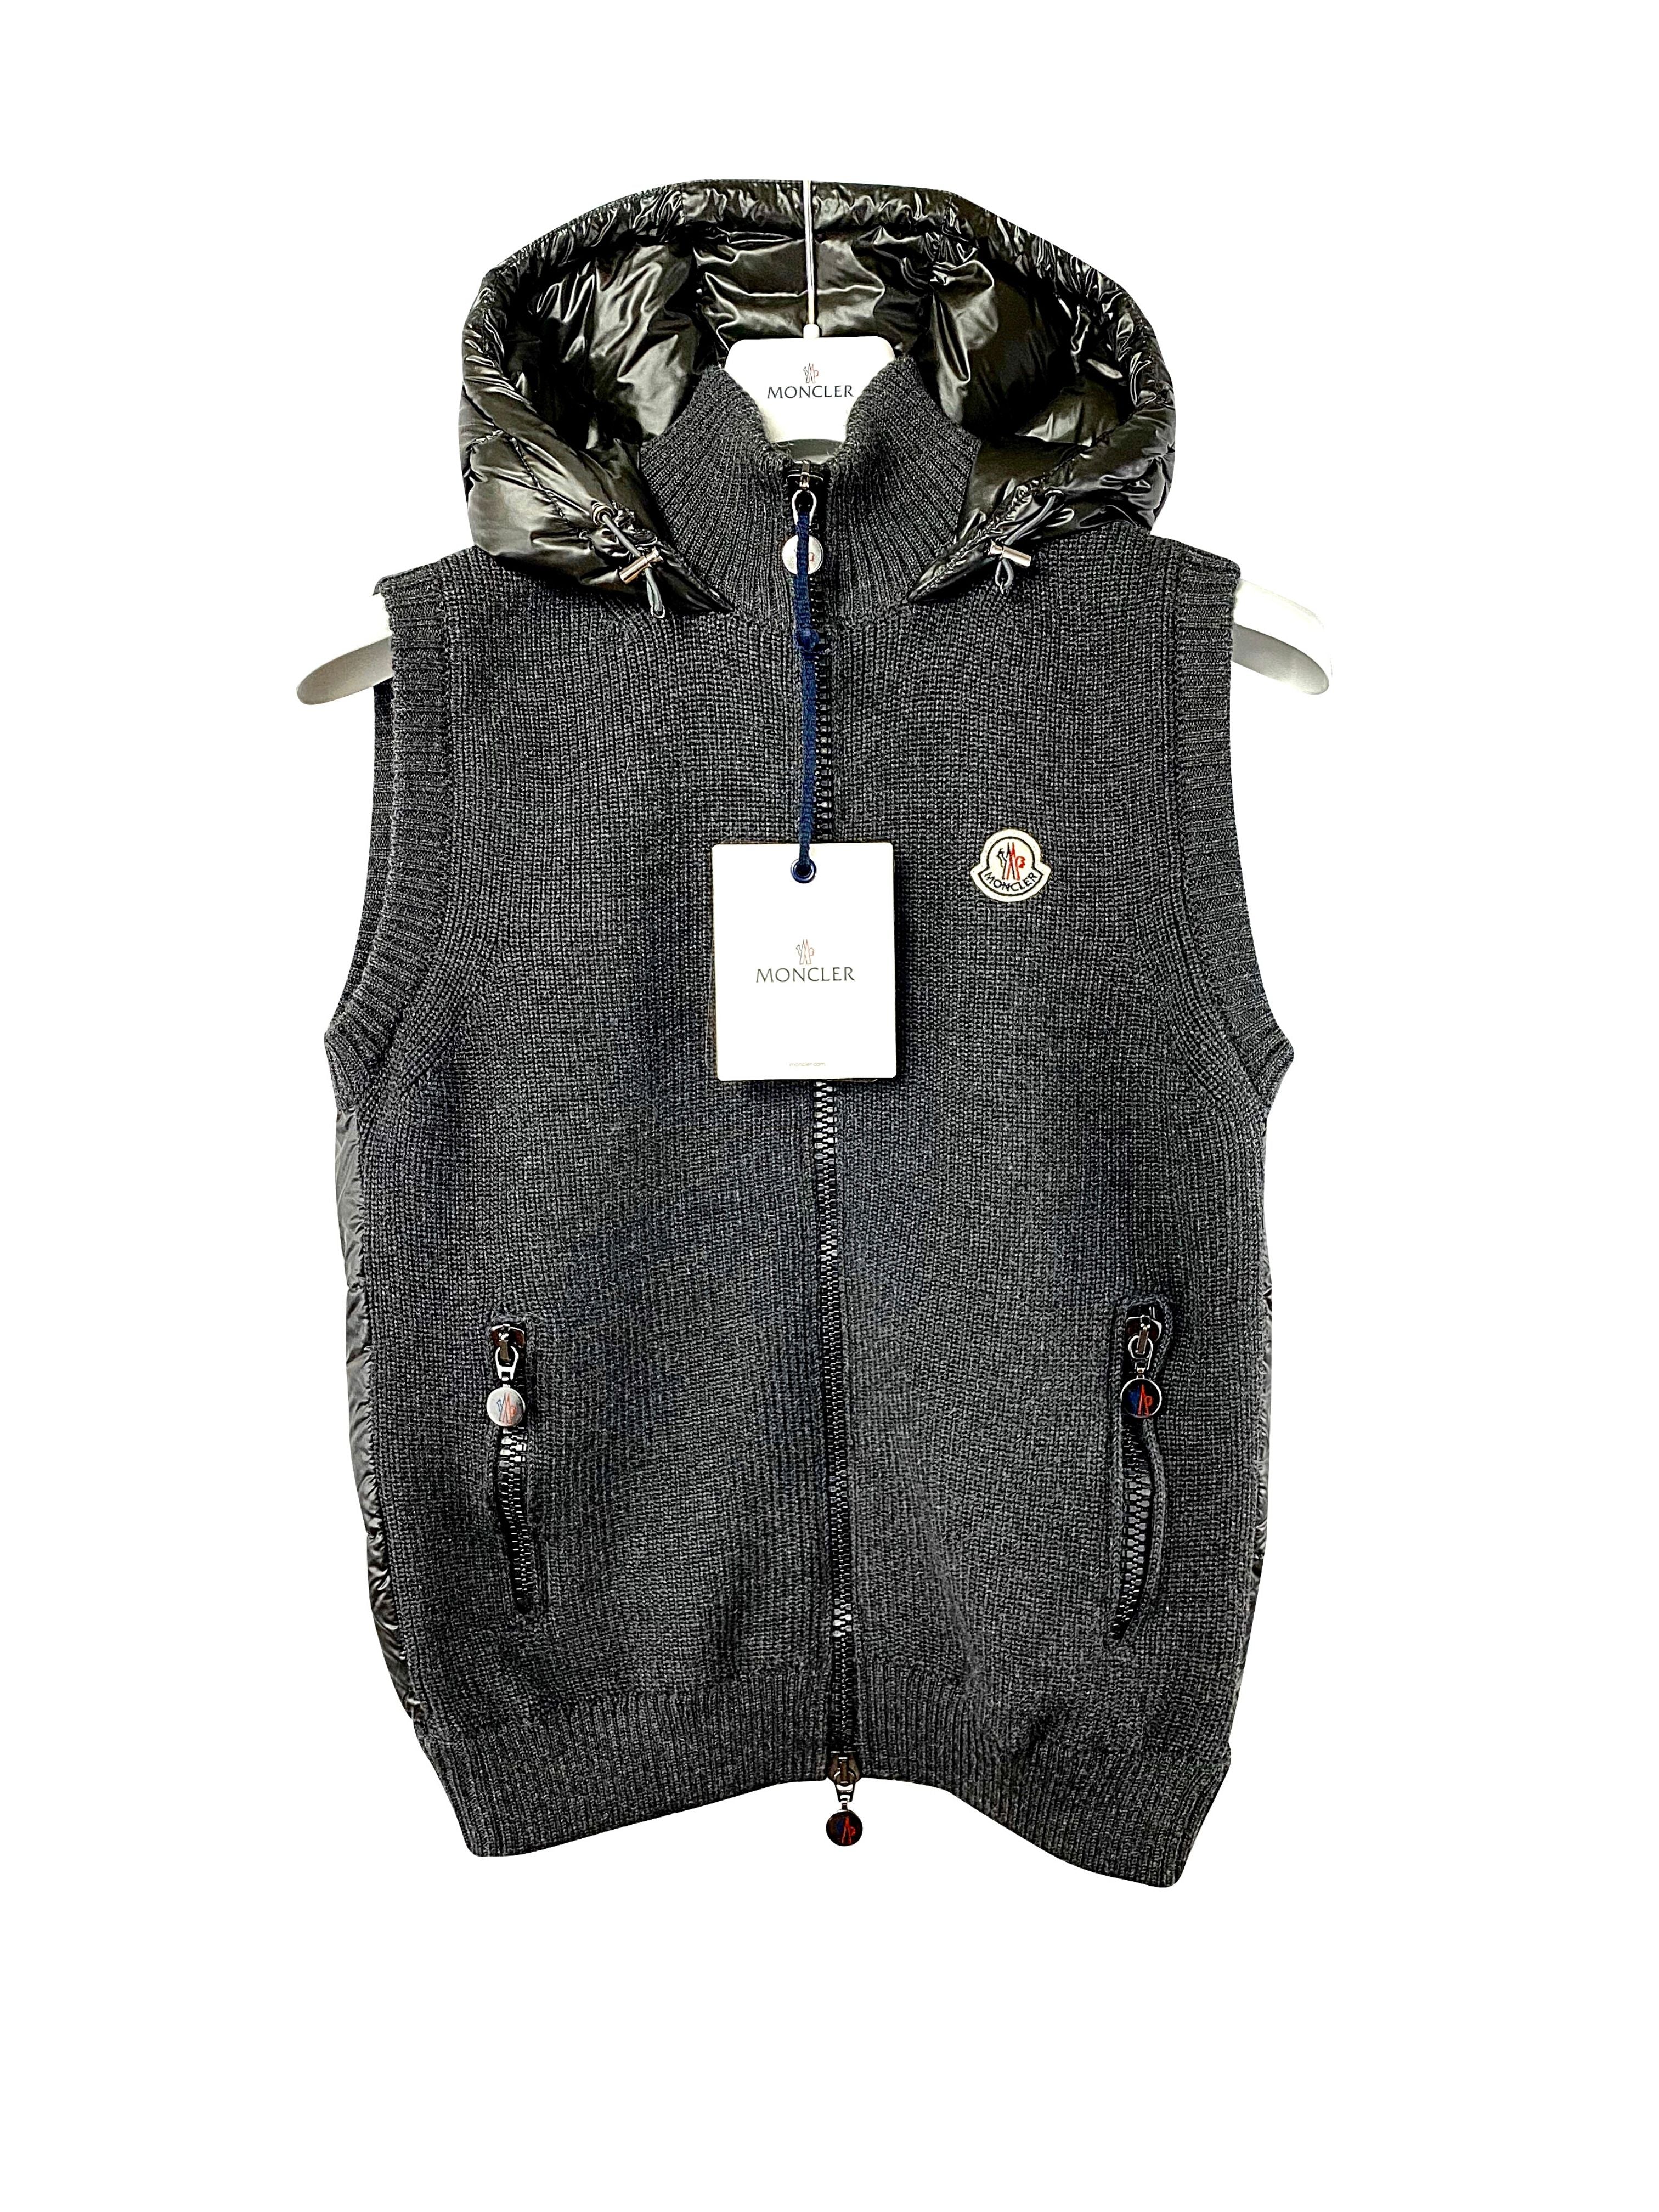 Moncler 'Maglia' Style Zip-Up Gilet - Size Small - Colour: Charcoal Grey –  HB Authenticated Luxury Wear